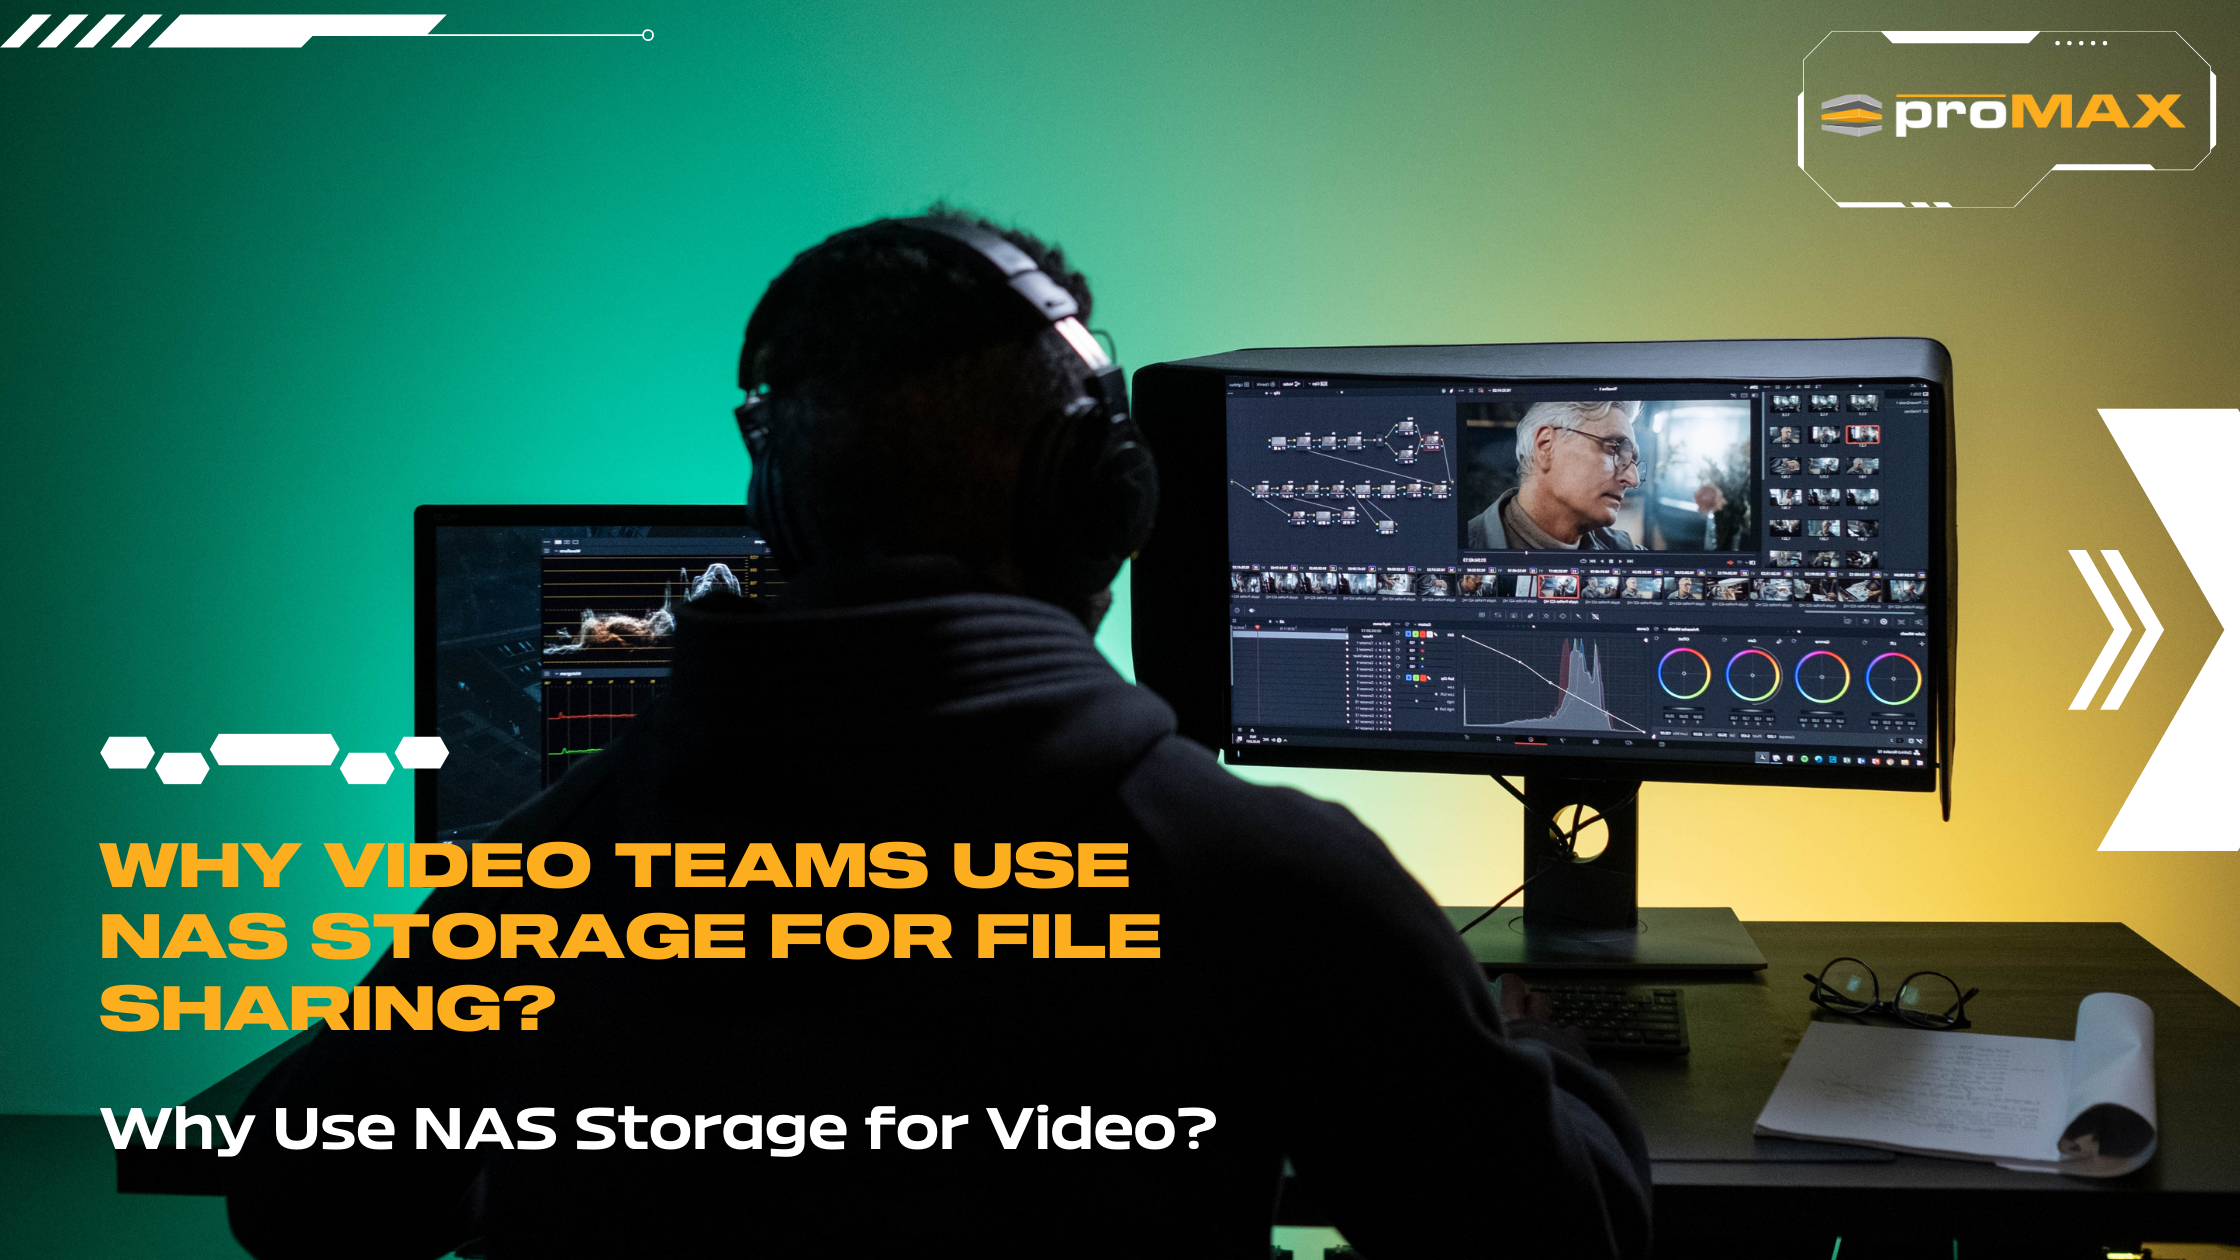 NAS Storage Devices: Why Professional Video Teams use NAS Storage for File Sharing